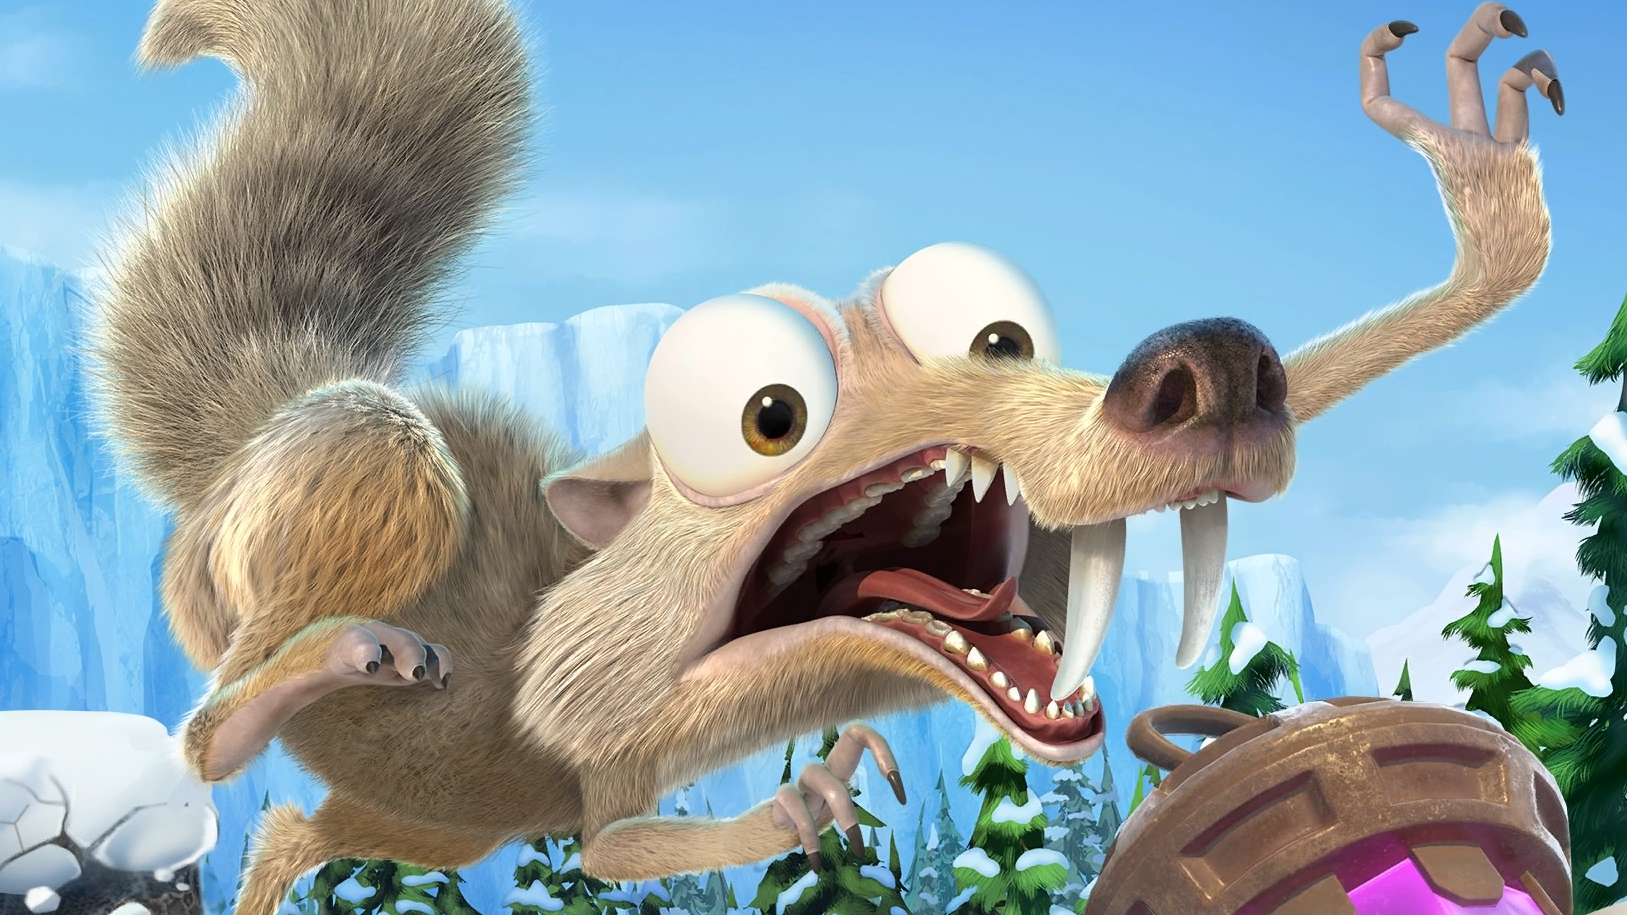 Ice age scrats nutty. Скрат Ледниковый период 2002. Ледниковый период 5 игра. Ледниковый период 3 игра.